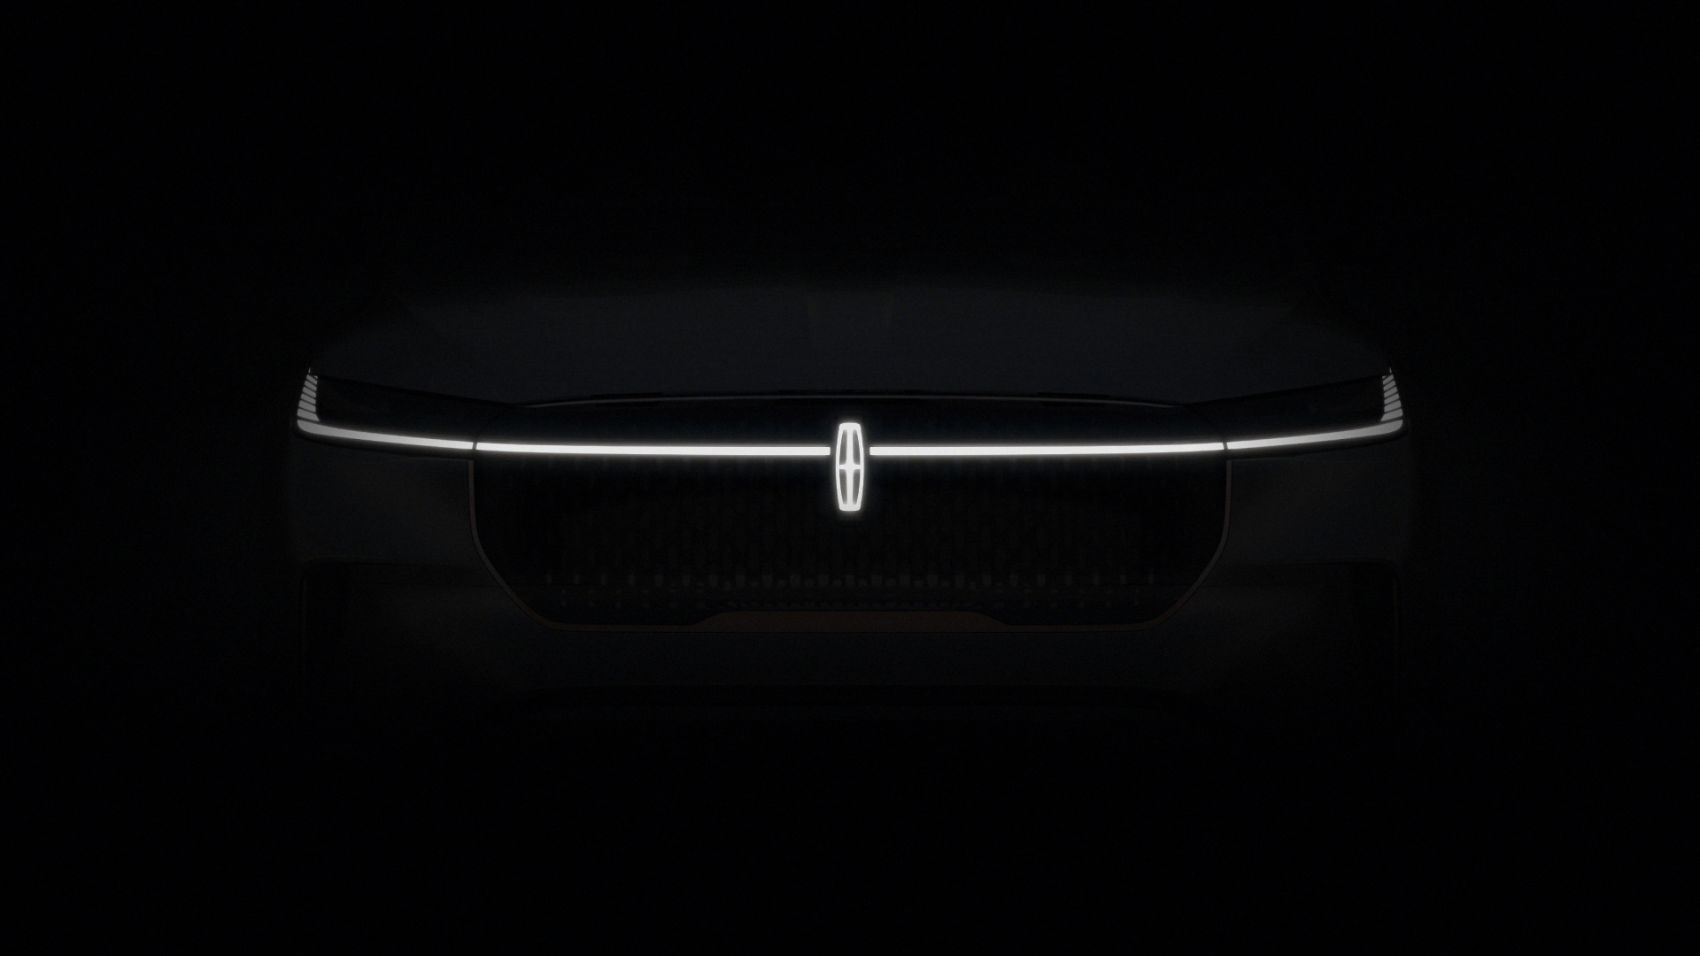 Future Lincoln Exterior Tease with Embrace Lighting